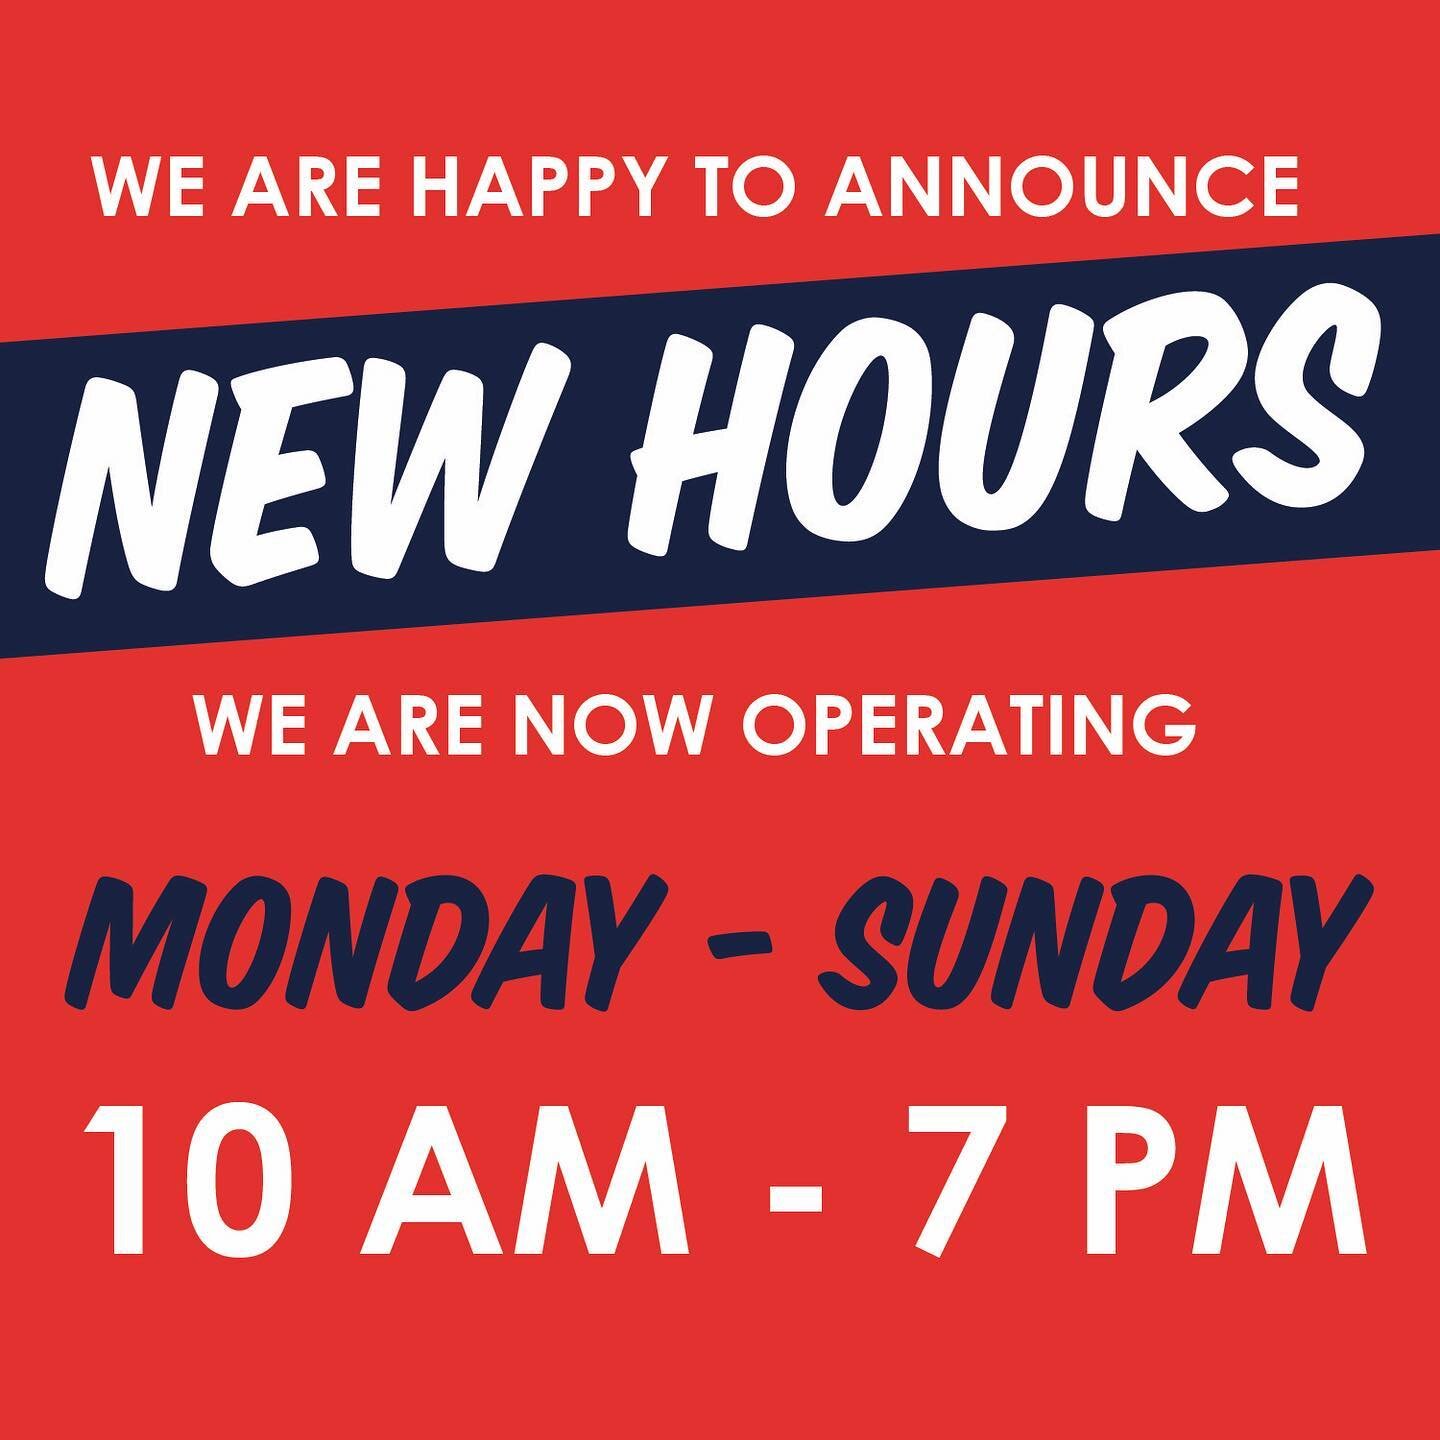 🚨 We are now open Sunday! And we are extending our hours to 7pm starting tomorrow !

#cresthardware #crest #crestnyc #hardwarestore #hardware #gardencenter #plantstore #plants #brookly #ny